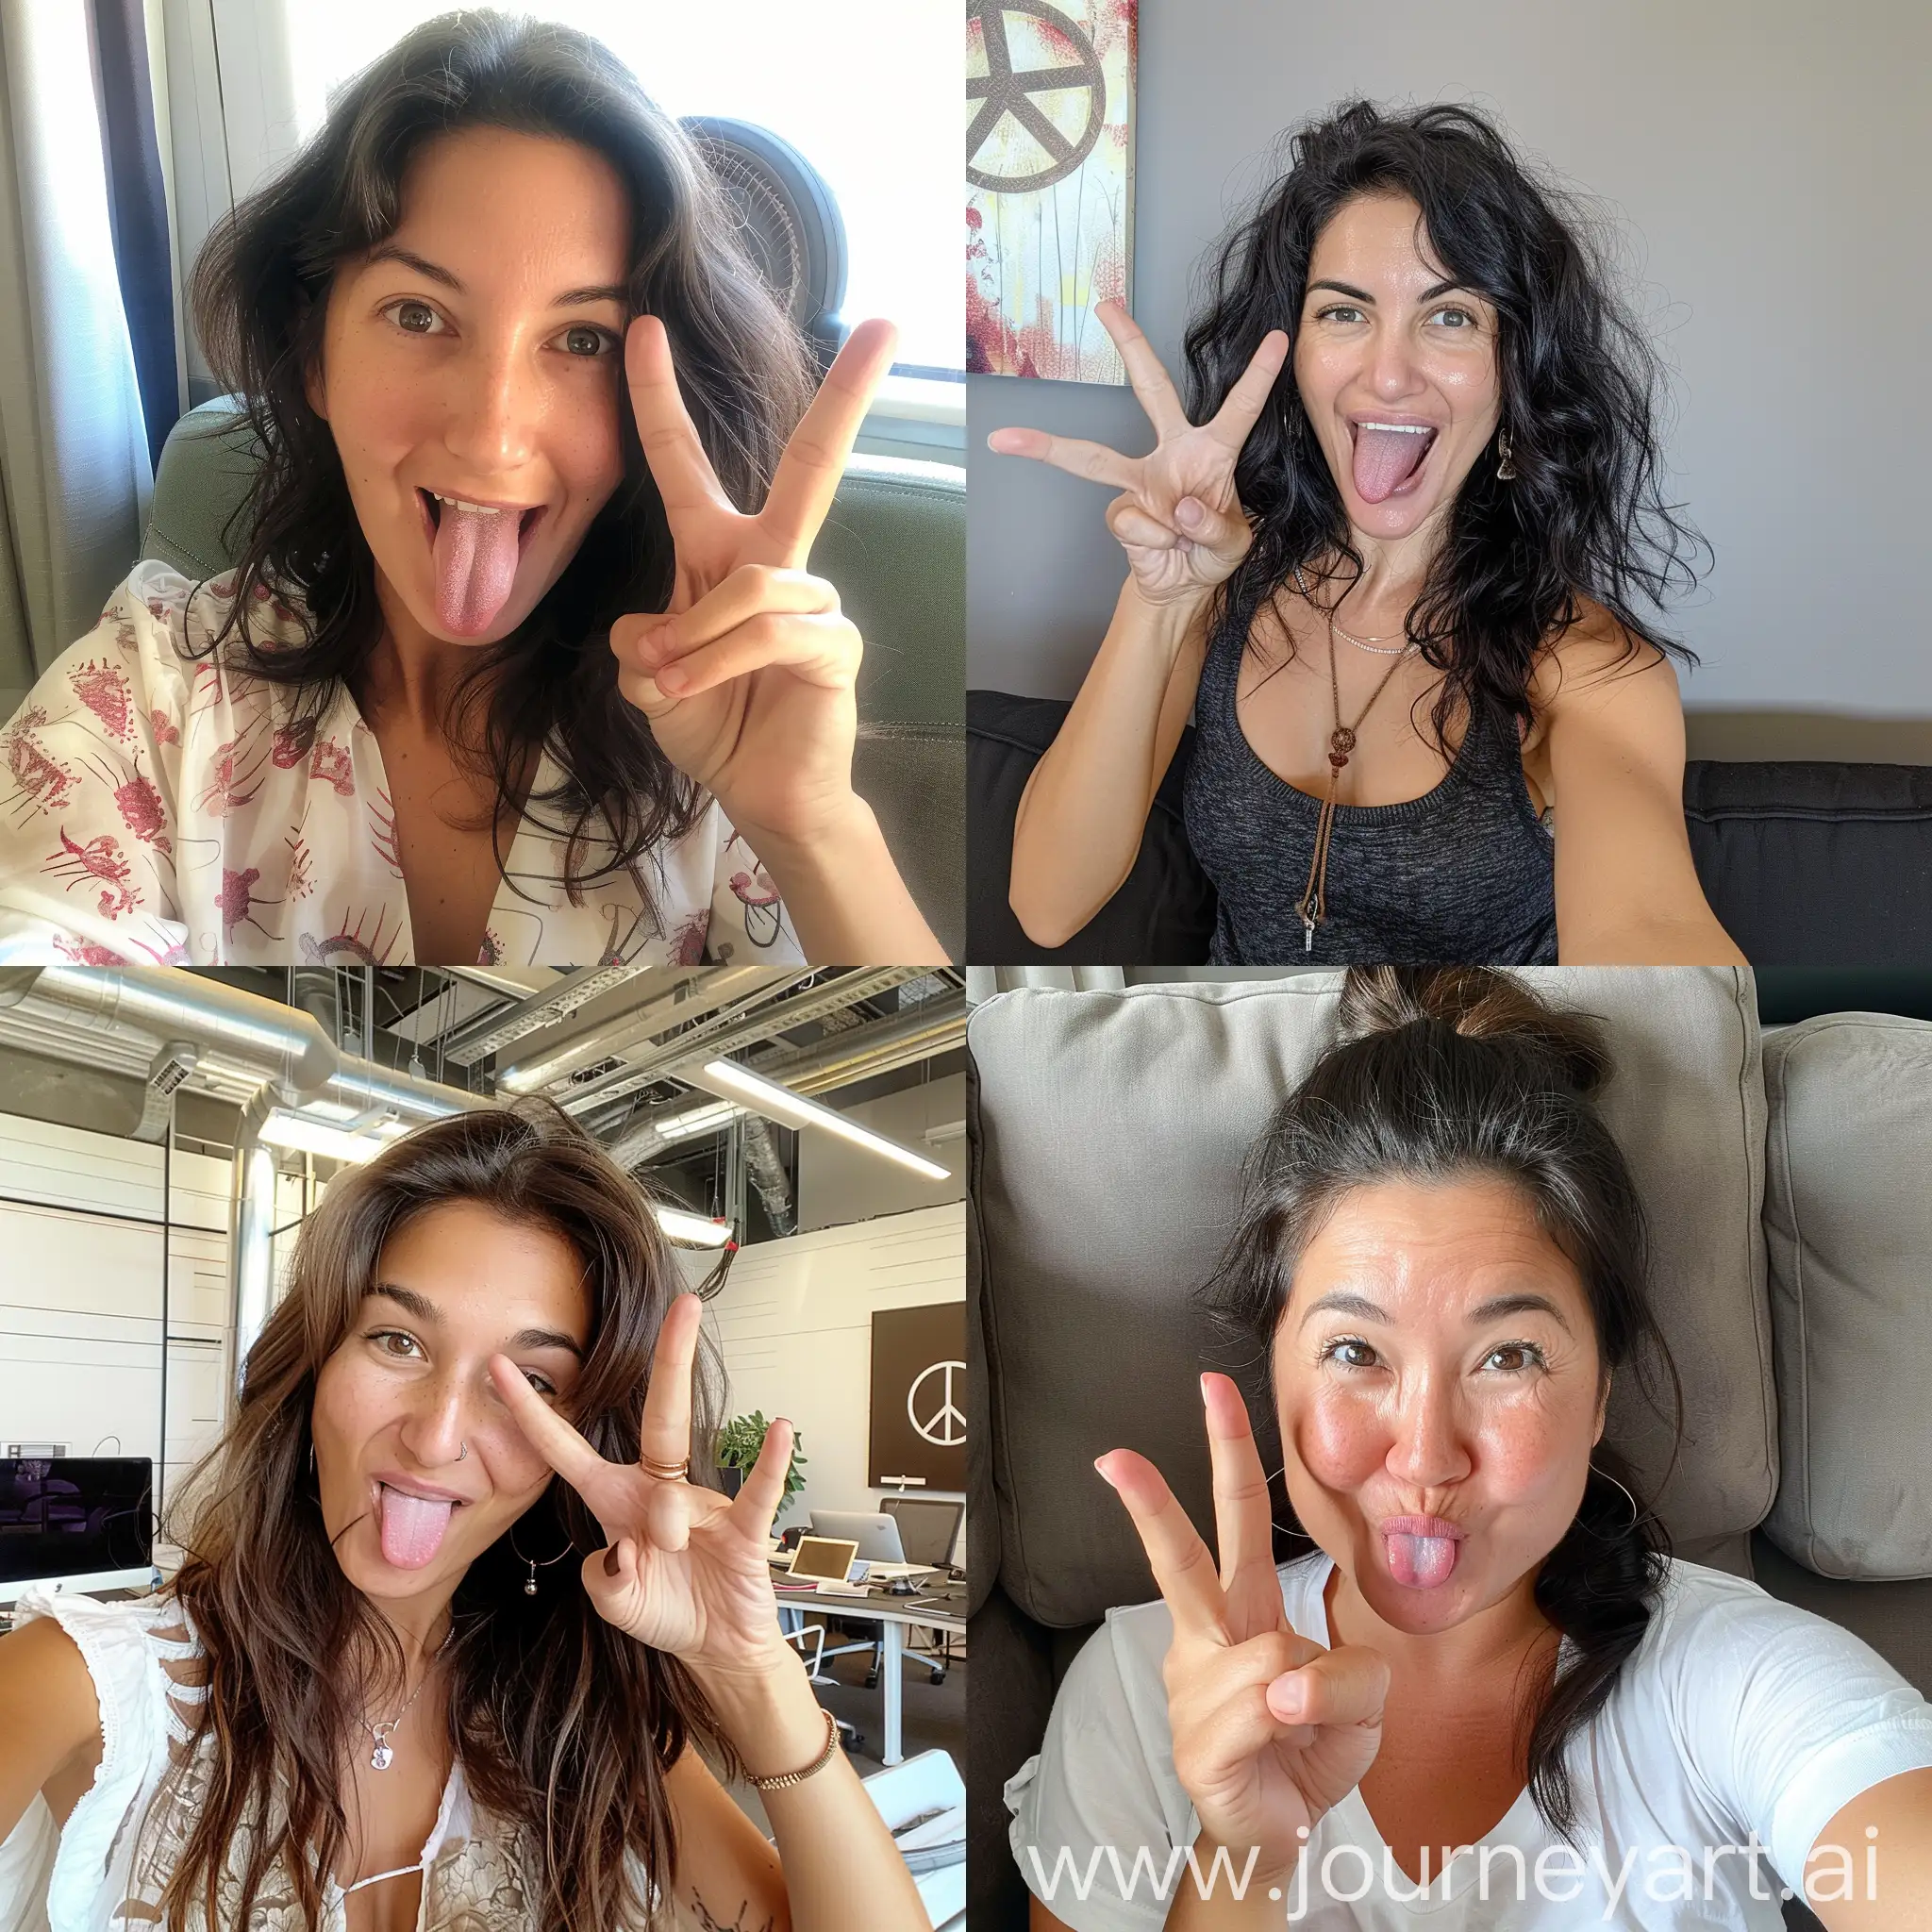 Playful-Woman-Taking-Selfie-with-Peace-Sign-and-Silly-Expression